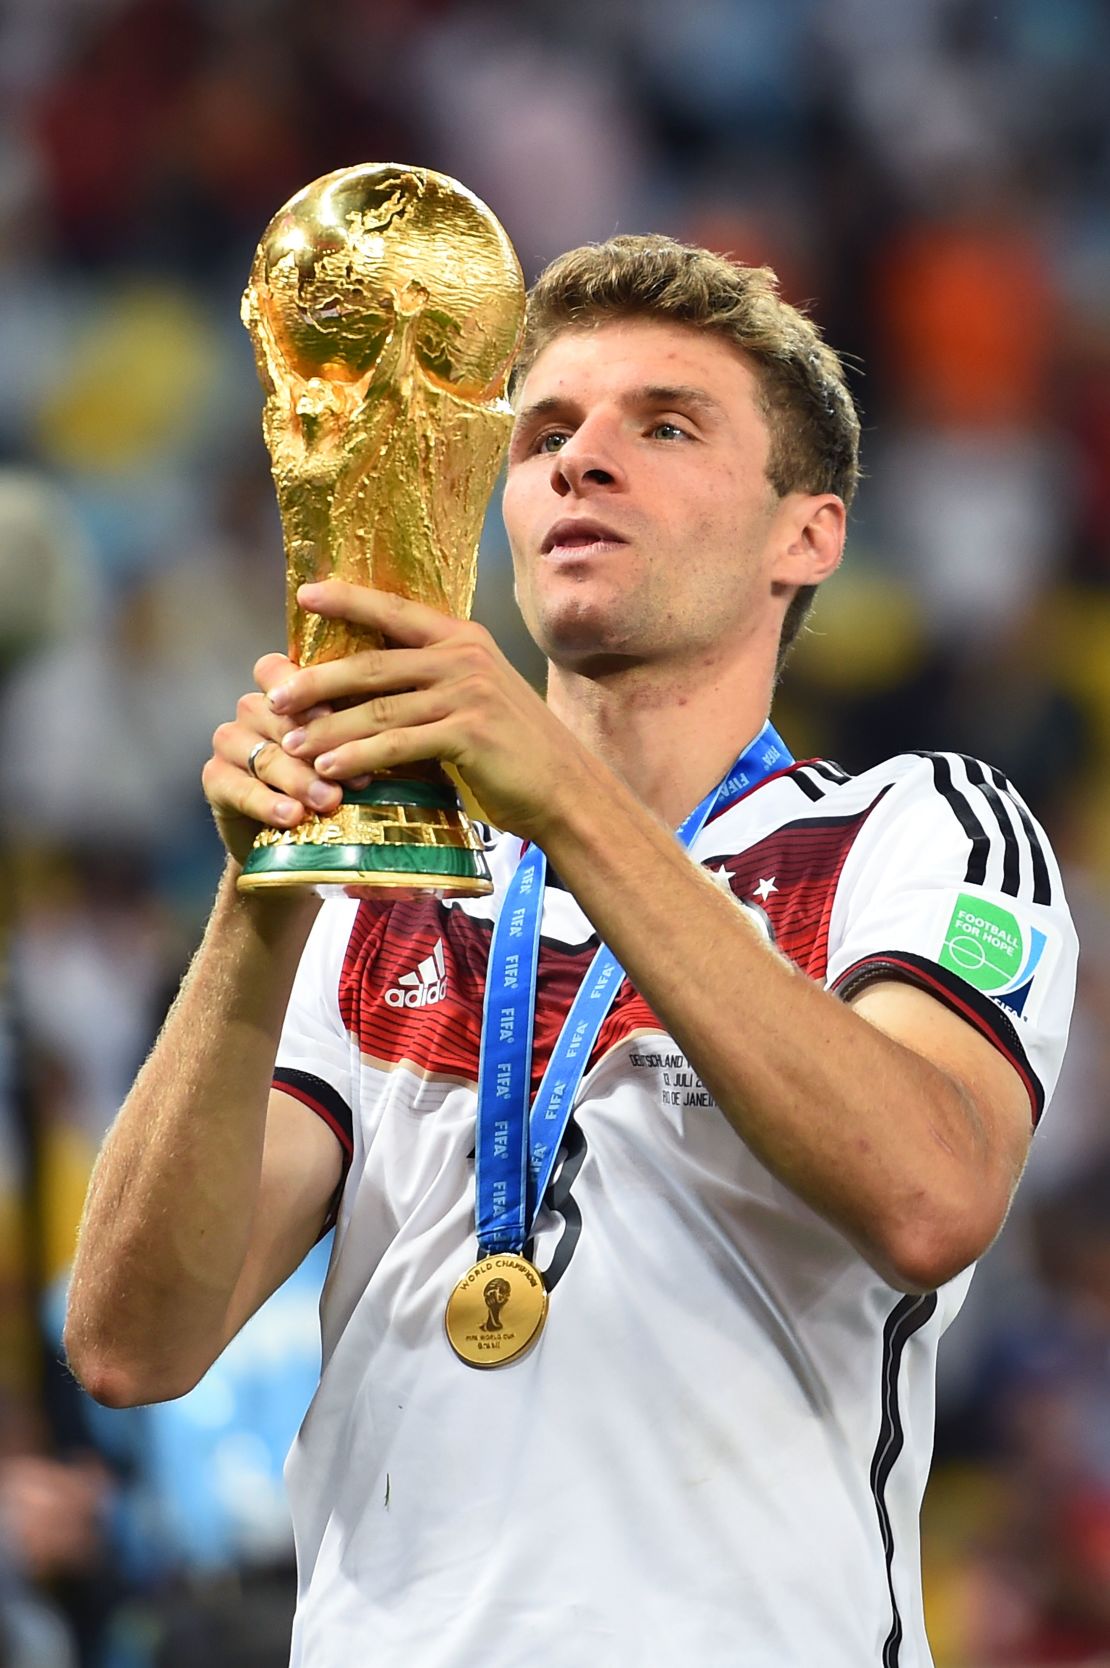 Among the 23-man squads participating at the Russia 2018, only the Argentinan contingent (12) has more World cup goals than Thomas Müller (10). 